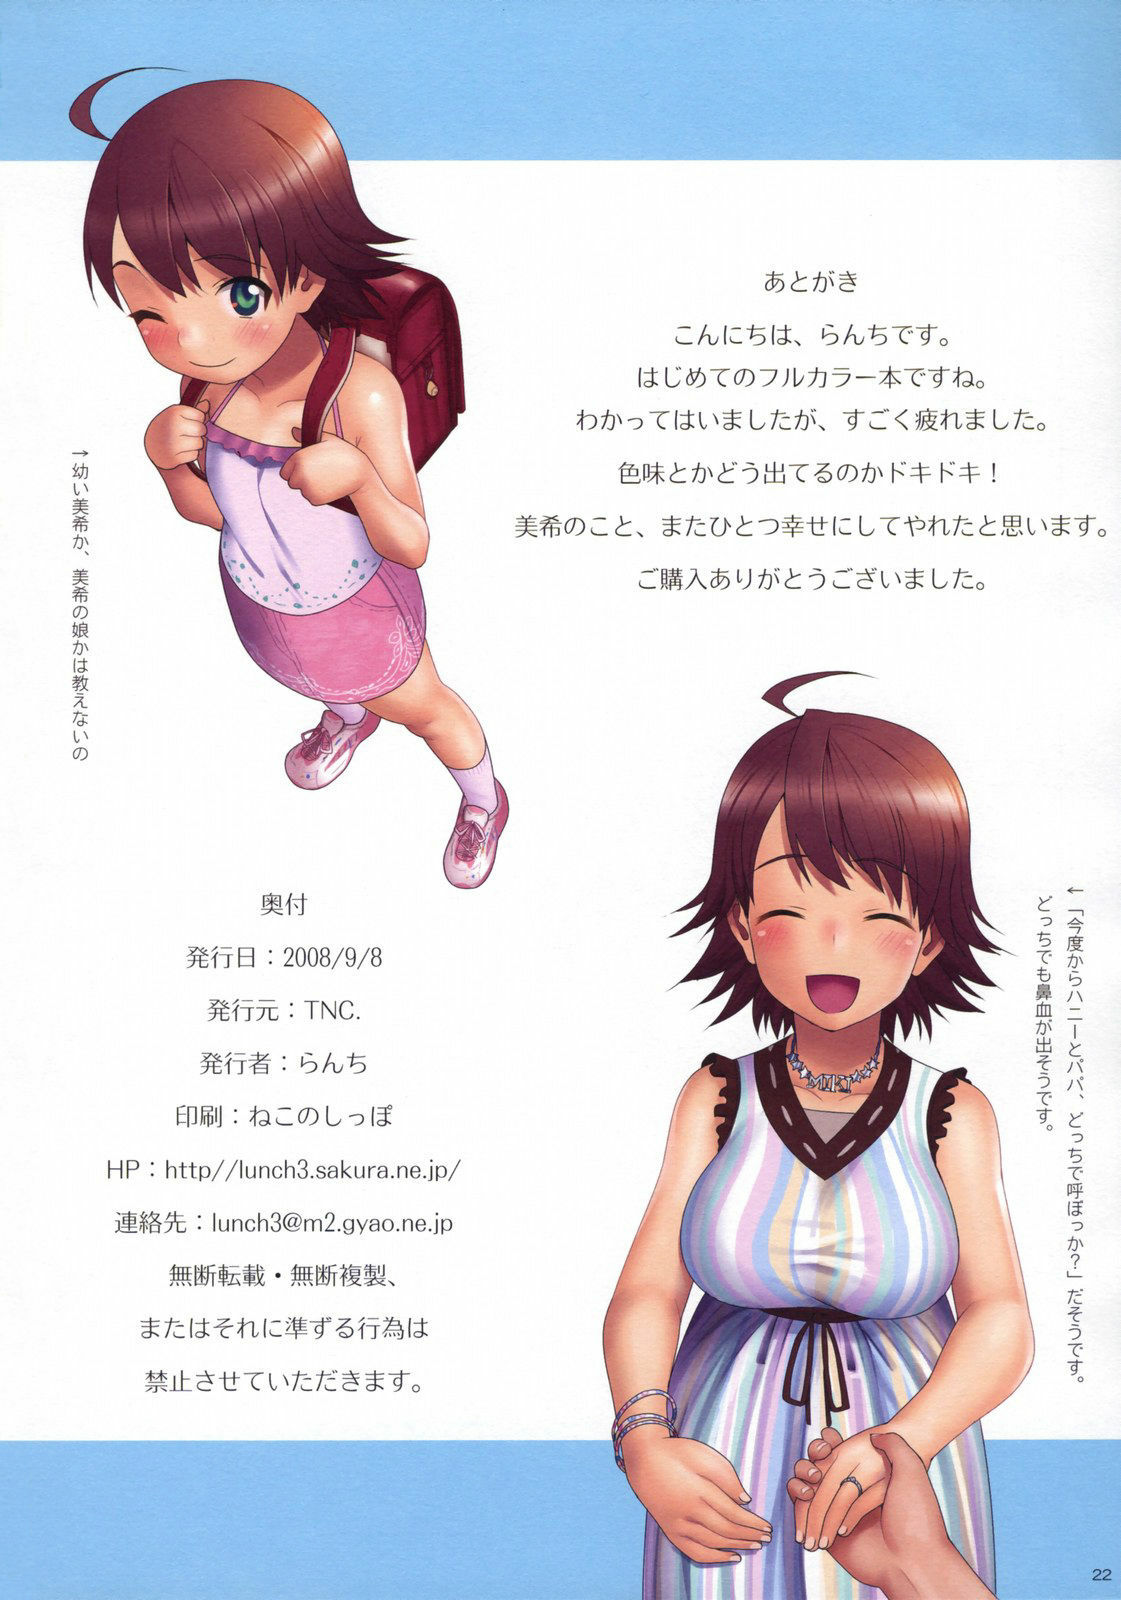 (CT12) [TNC. (Lunch)] Fourteen Plus (THE iDOLM@STER) [Decensored] page 21 full